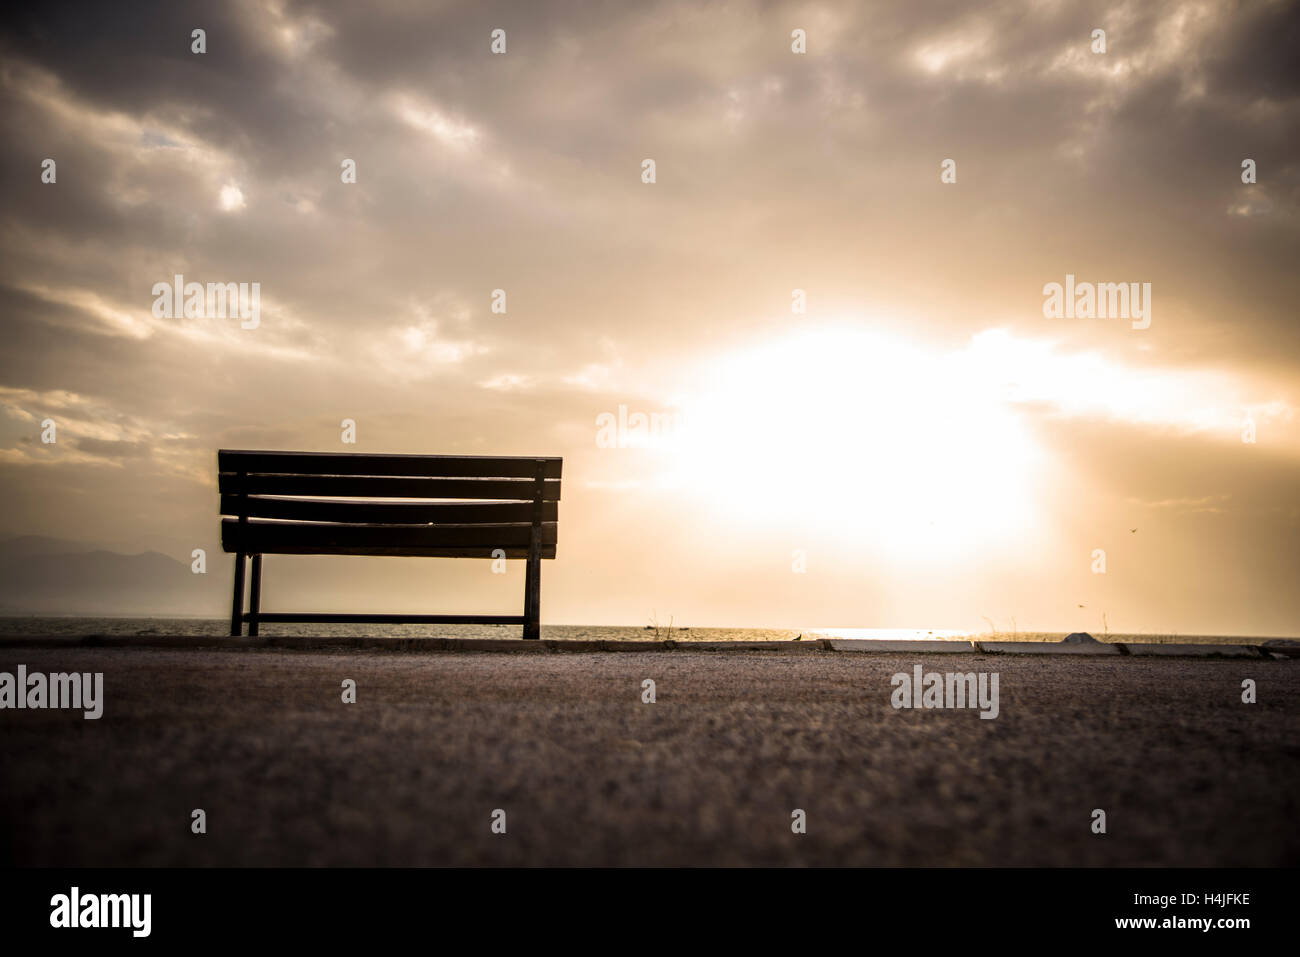 An empty bench set against a sunset sky. Stock Photo